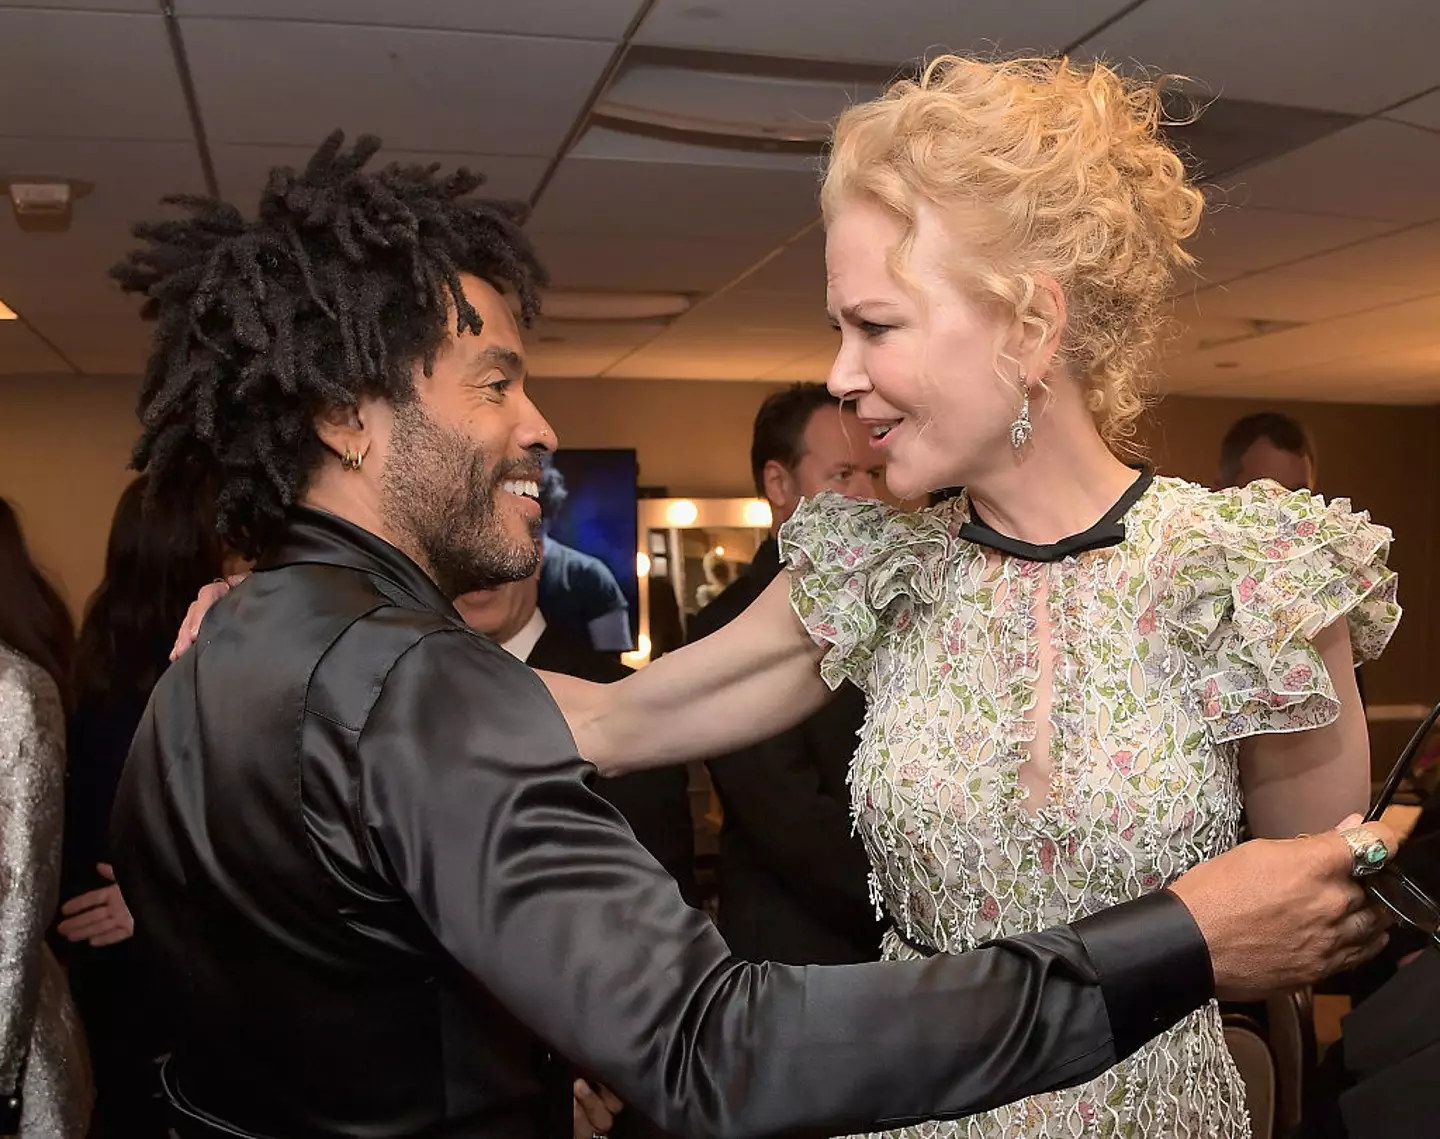 The Moulin Rouge star and Lenny Kravitz were once engaged following her split from Tom Cruise. (Charley Gallay / Stringer / Getty Images)